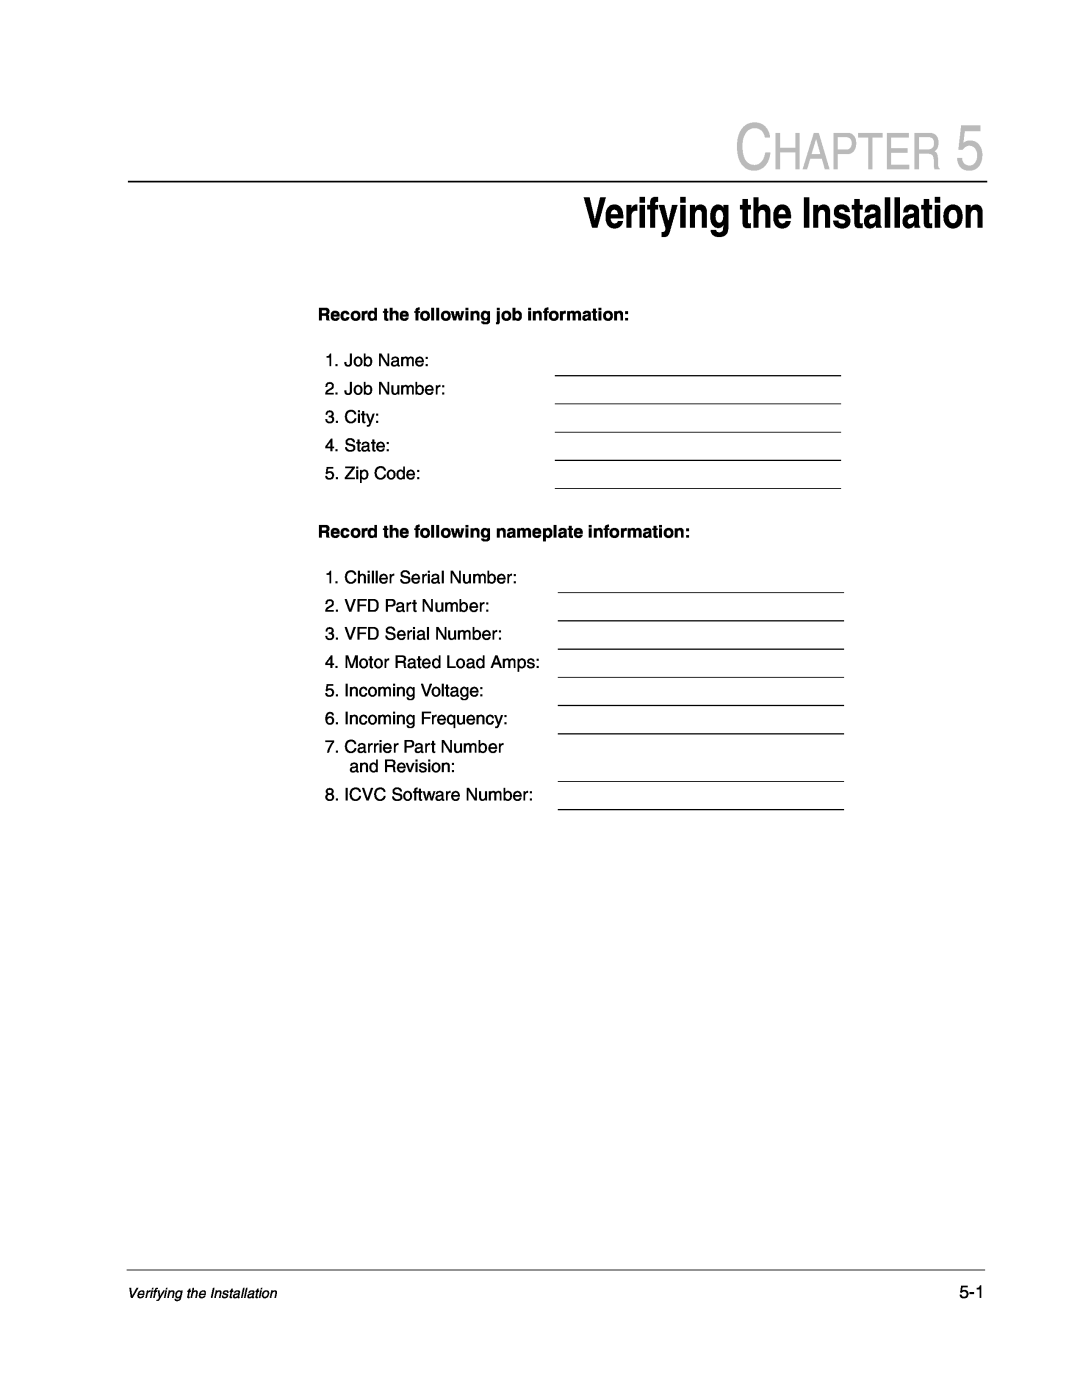 Carrier D2-3466-2 instruction manual Verifying the Installation, Record the following job information, Chapter 